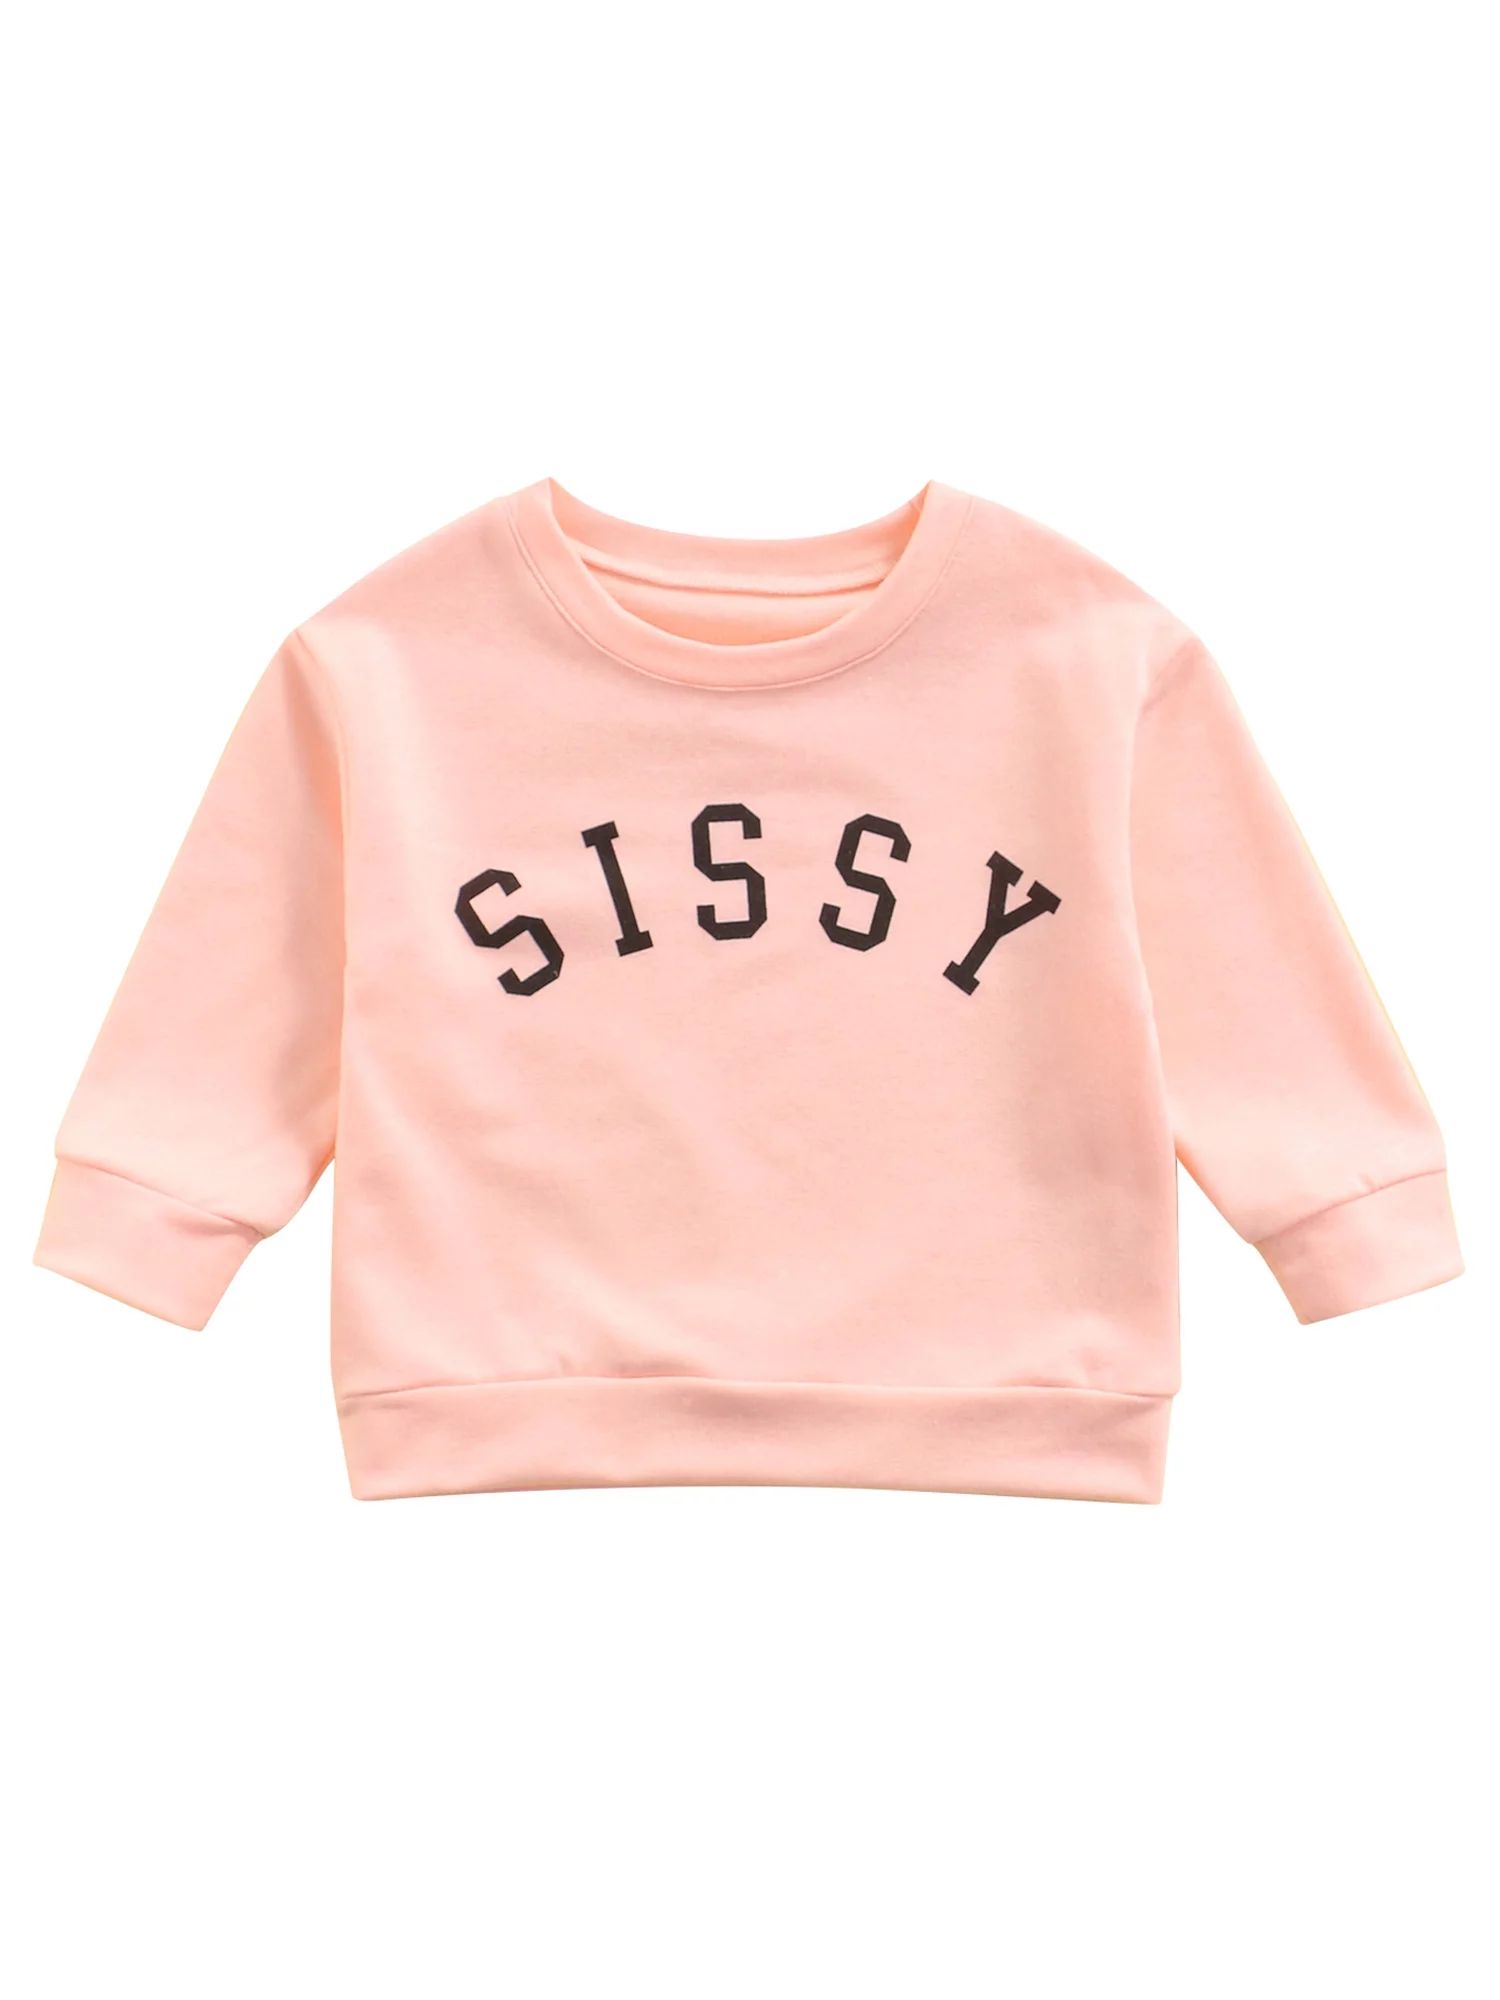 Sissy Letter Printed Baby Boy Girl Crewneck Sweatshirt Kids Infant Pullover Tops Fall Clothes | Walmart (US)